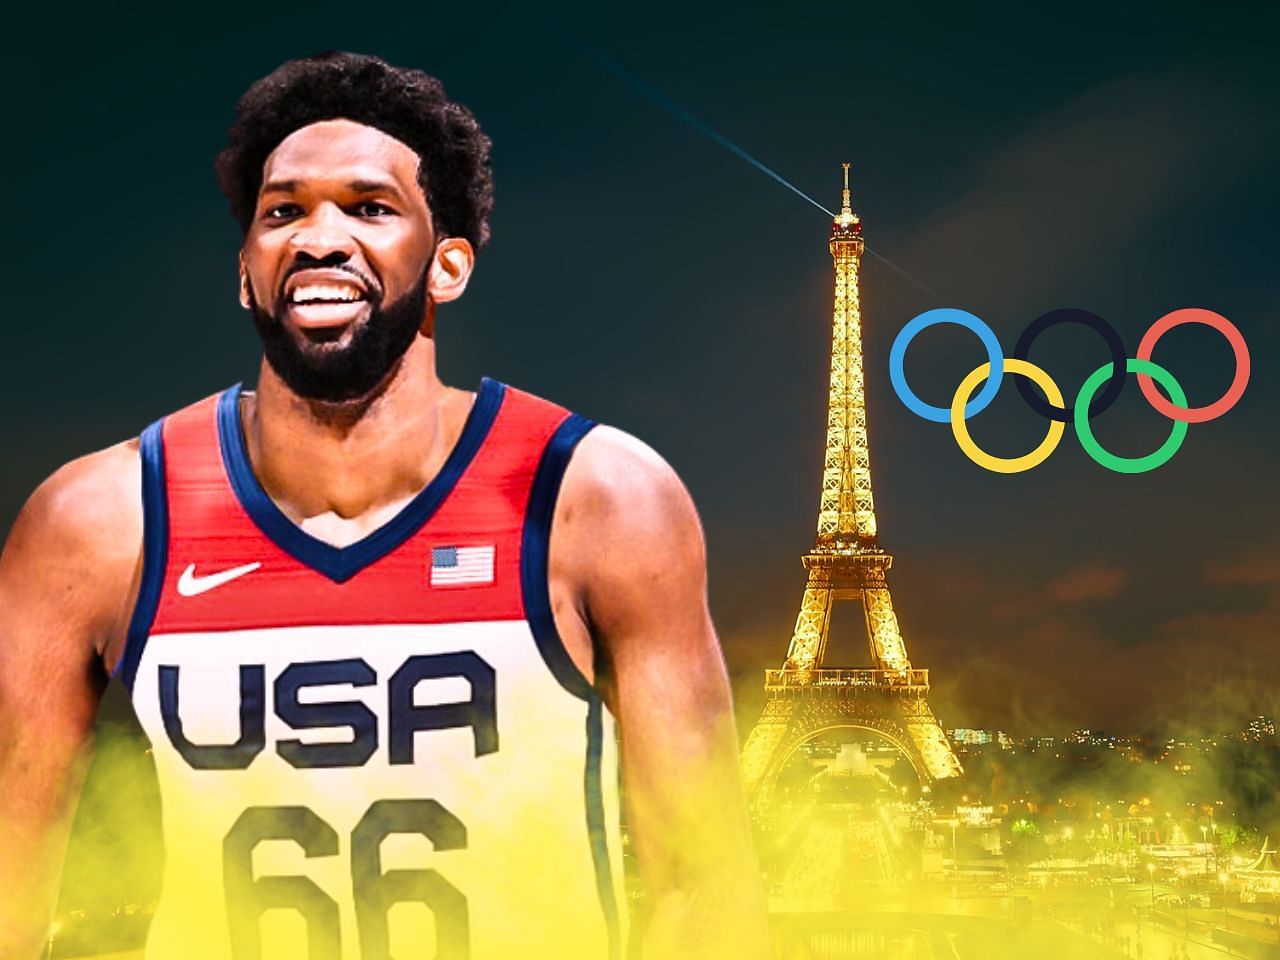 Joel Embiid may suit up the United States at next summer